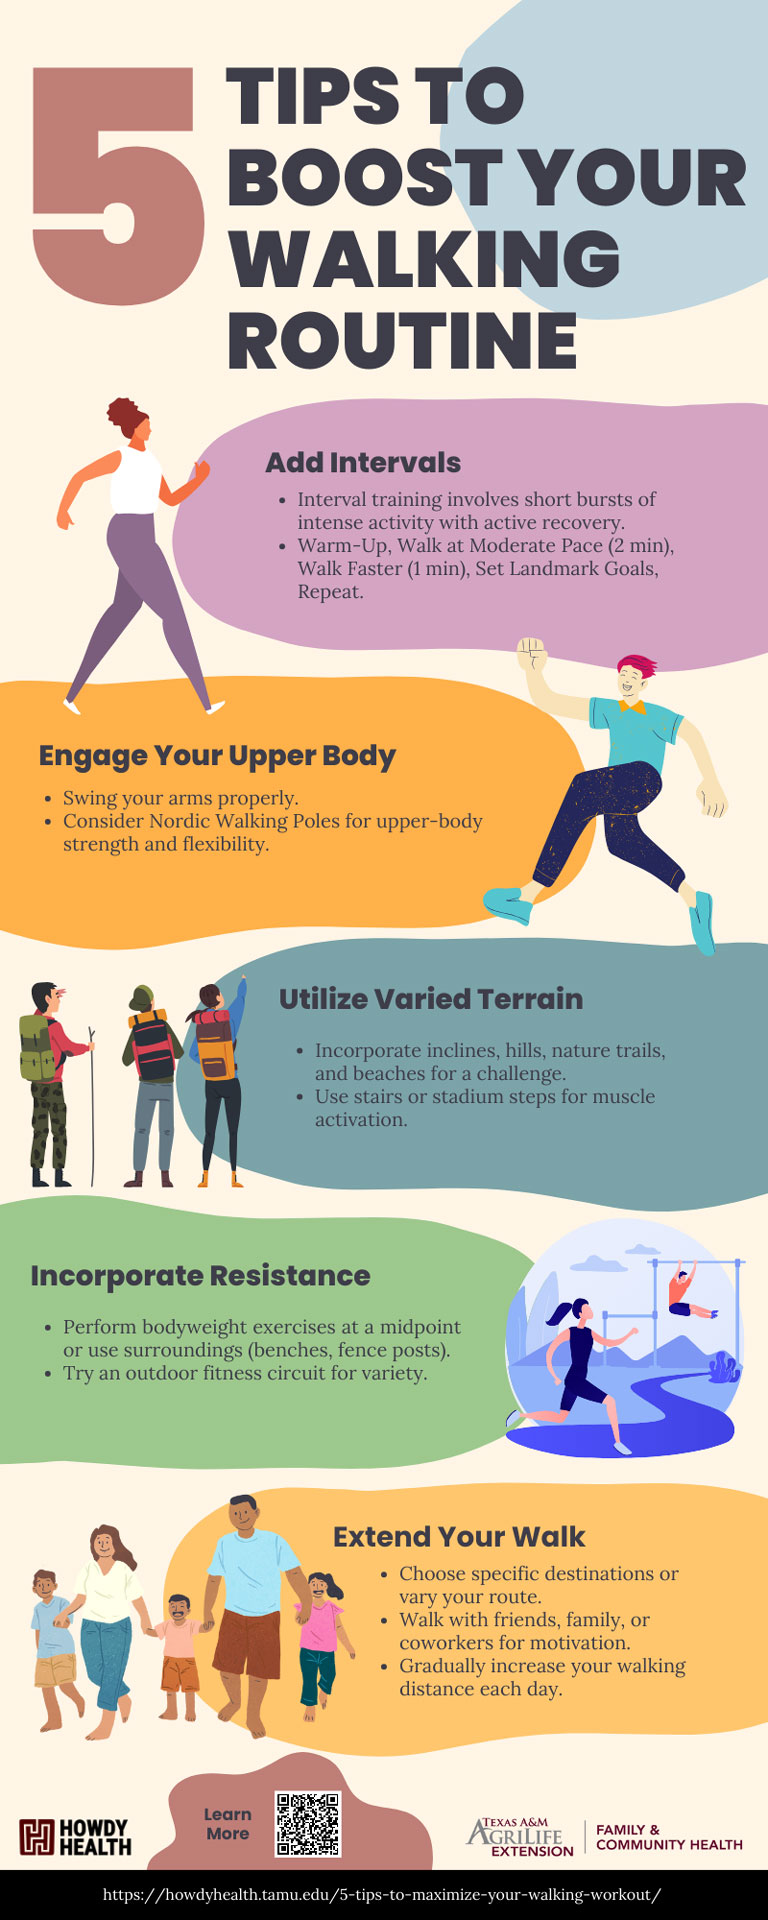 Walking Workout: 5 Tips to Boost Your Walking Routine | Howdy Health